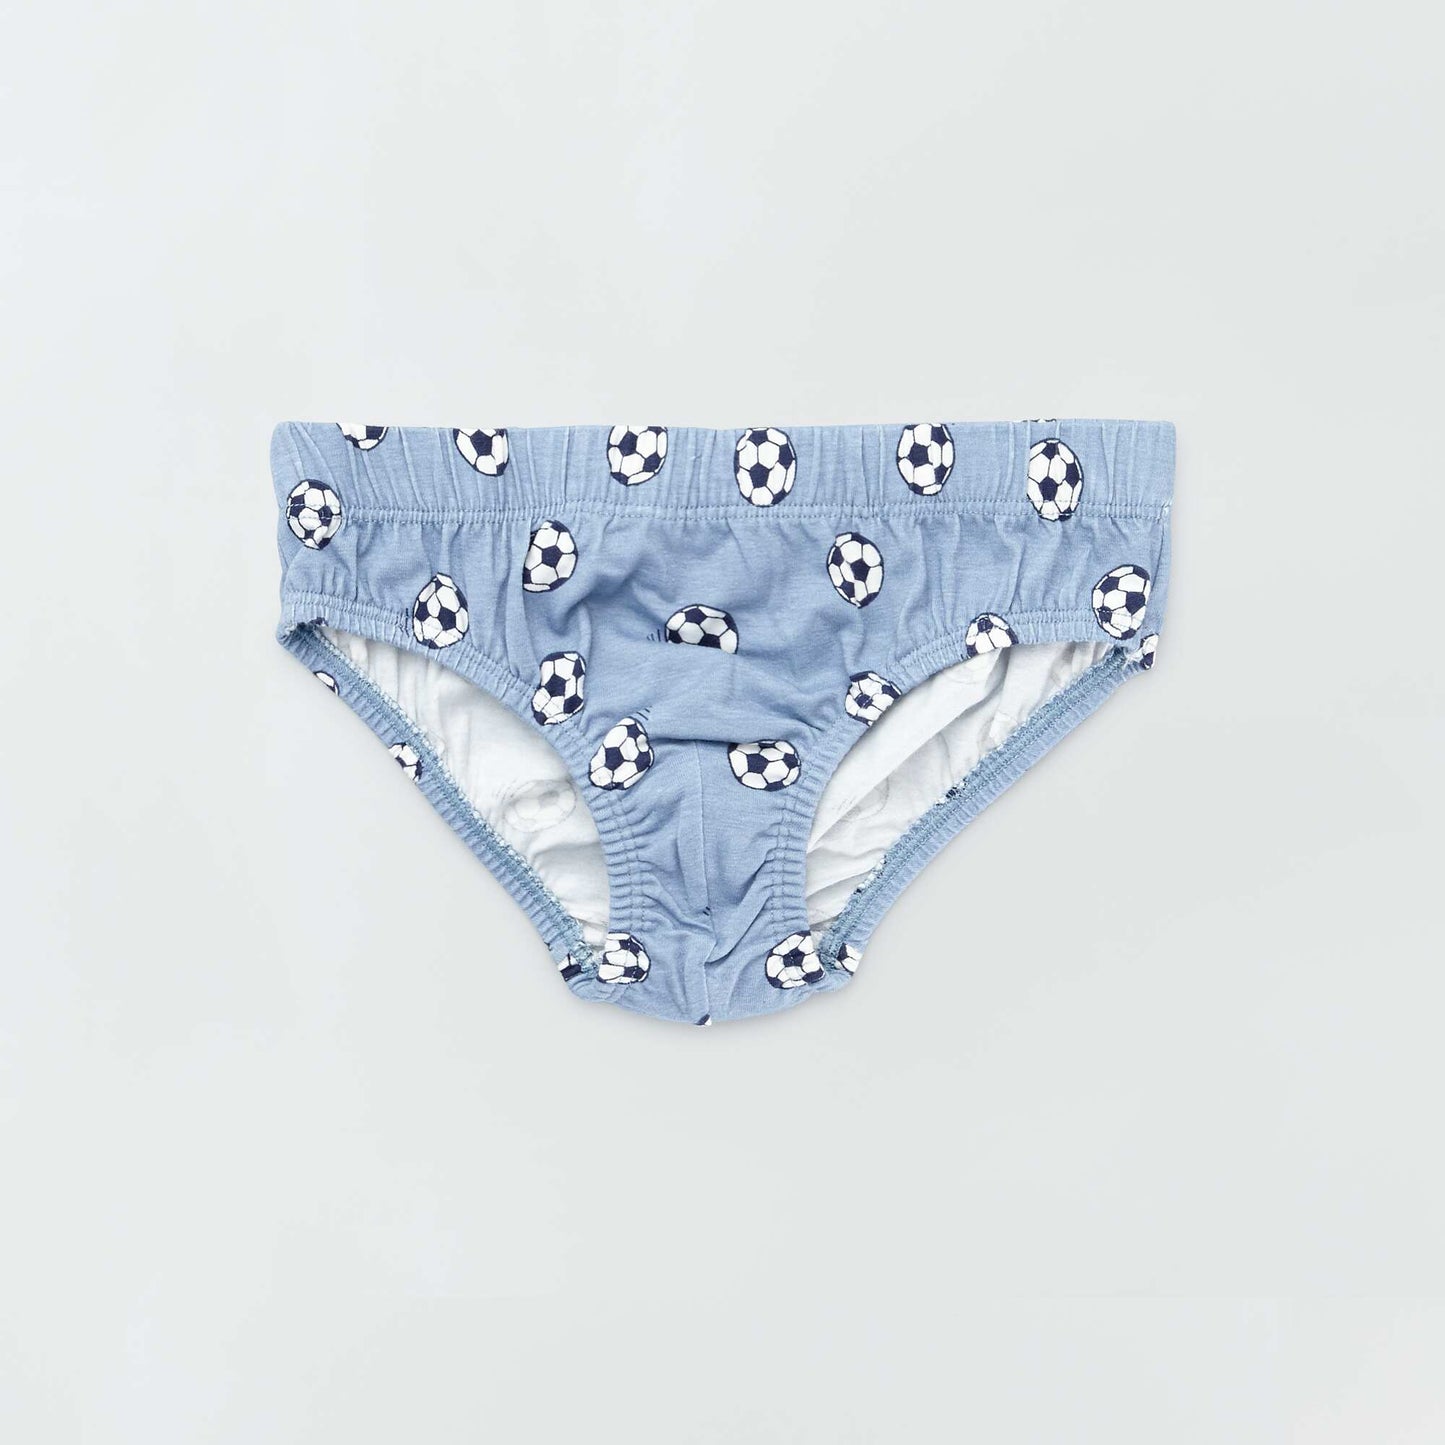 Pack of 5 pairs of cotton briefs BLUE